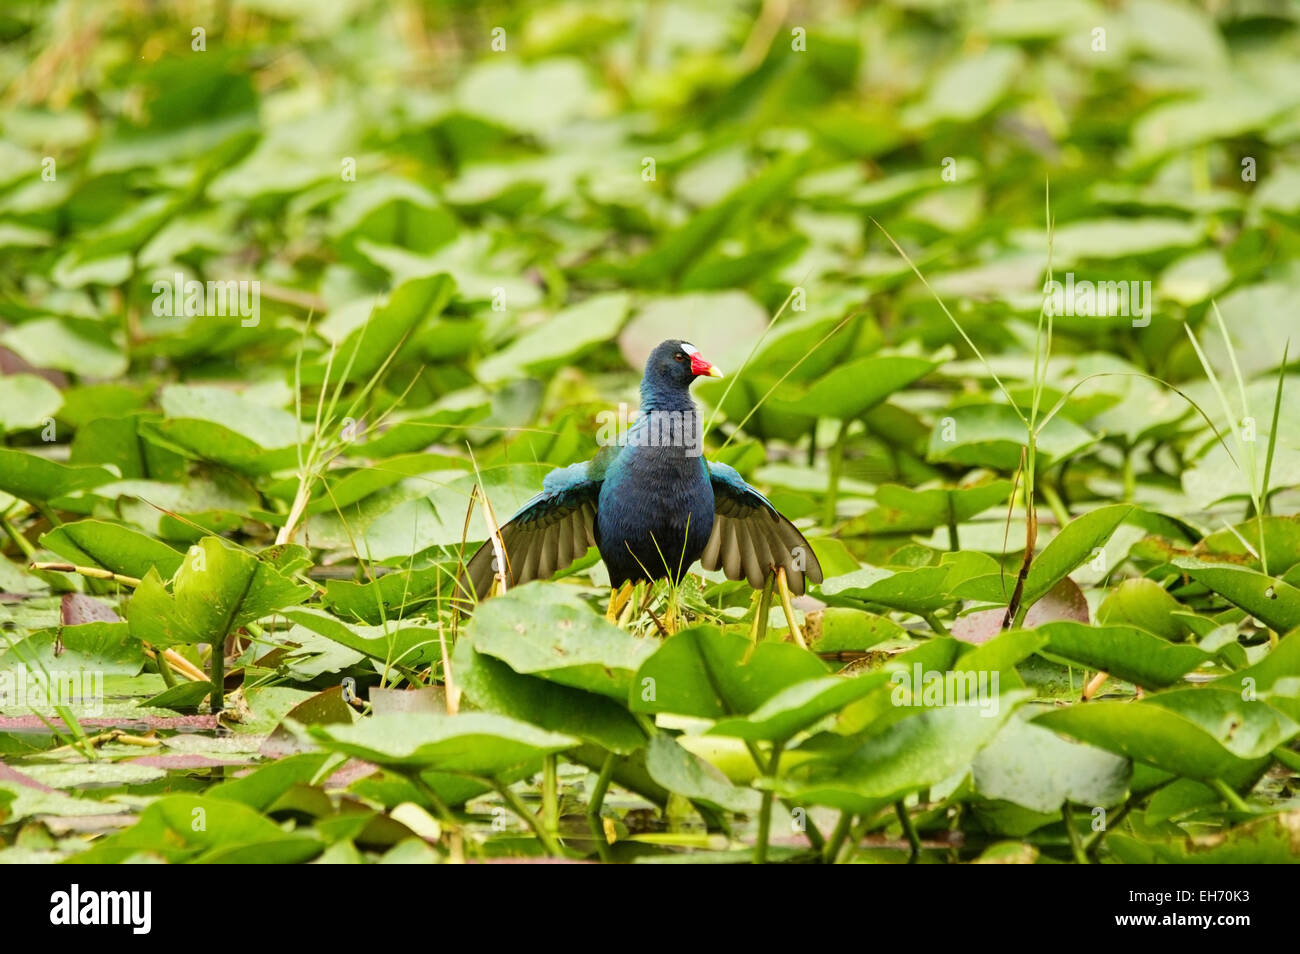 purple gallinule or Porphyrula martinica bird walking on leaves in the Everglades swamp Stock Photo